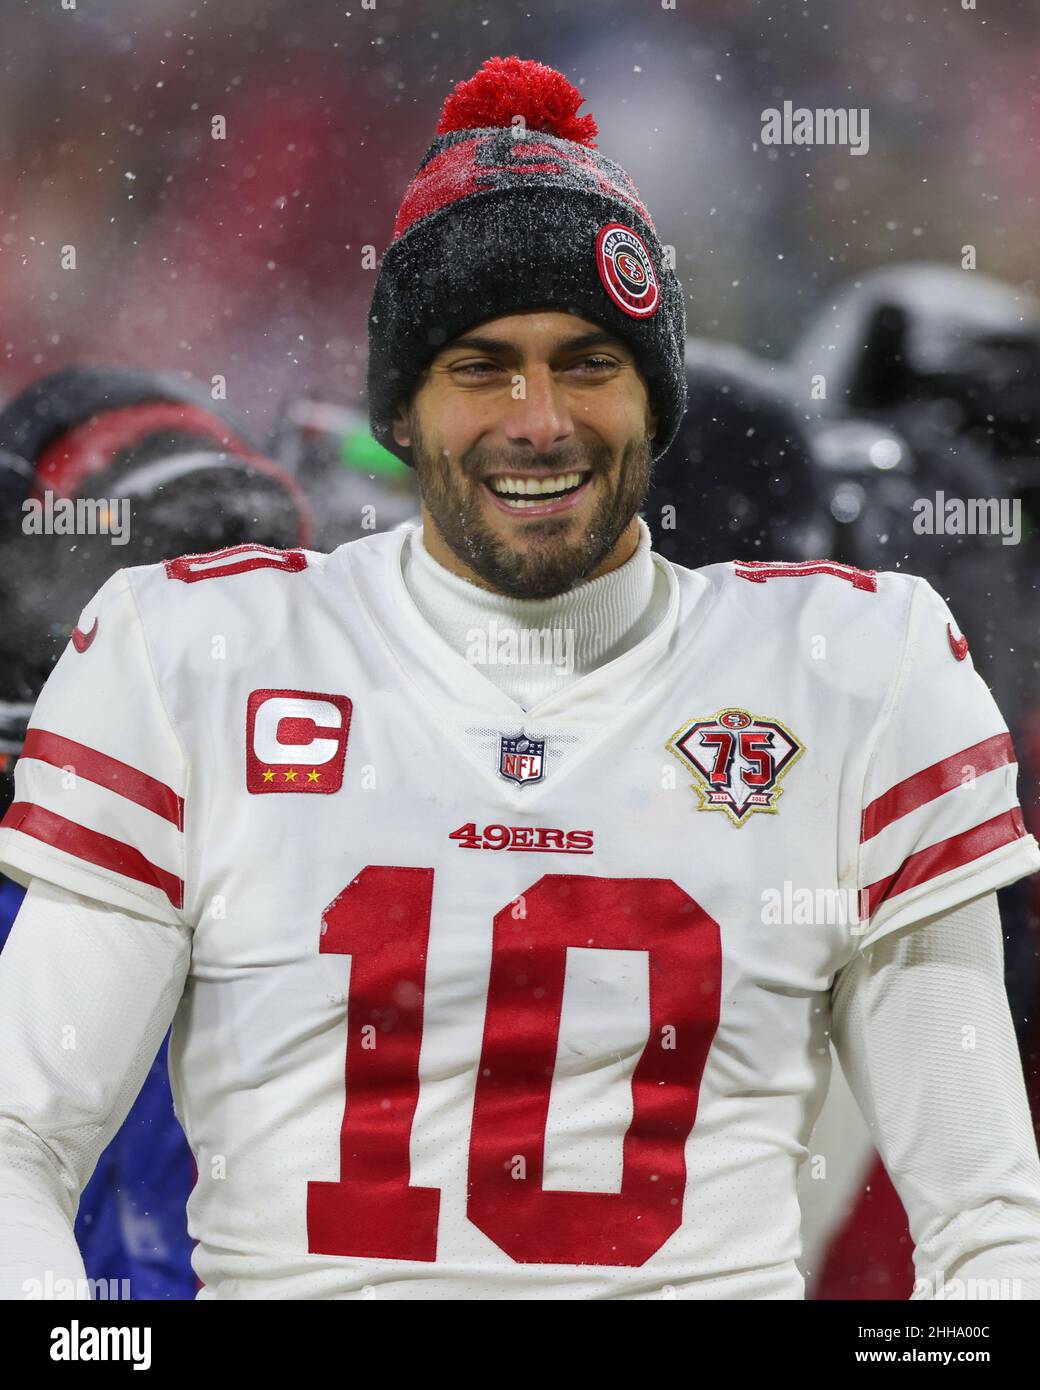 Green Bay, Wisconsin, USA. 22nd Jan, 2022. San Francisco 49ers quarterback Jimmy Garoppolo (10) during the NFL divisional playoff football game between the San Francisco 49ers and the Green Bay Packers at Lambeau Field in Green Bay, Wisconsin. Darren Lee/CSM/Alamy Live News Stock Photo